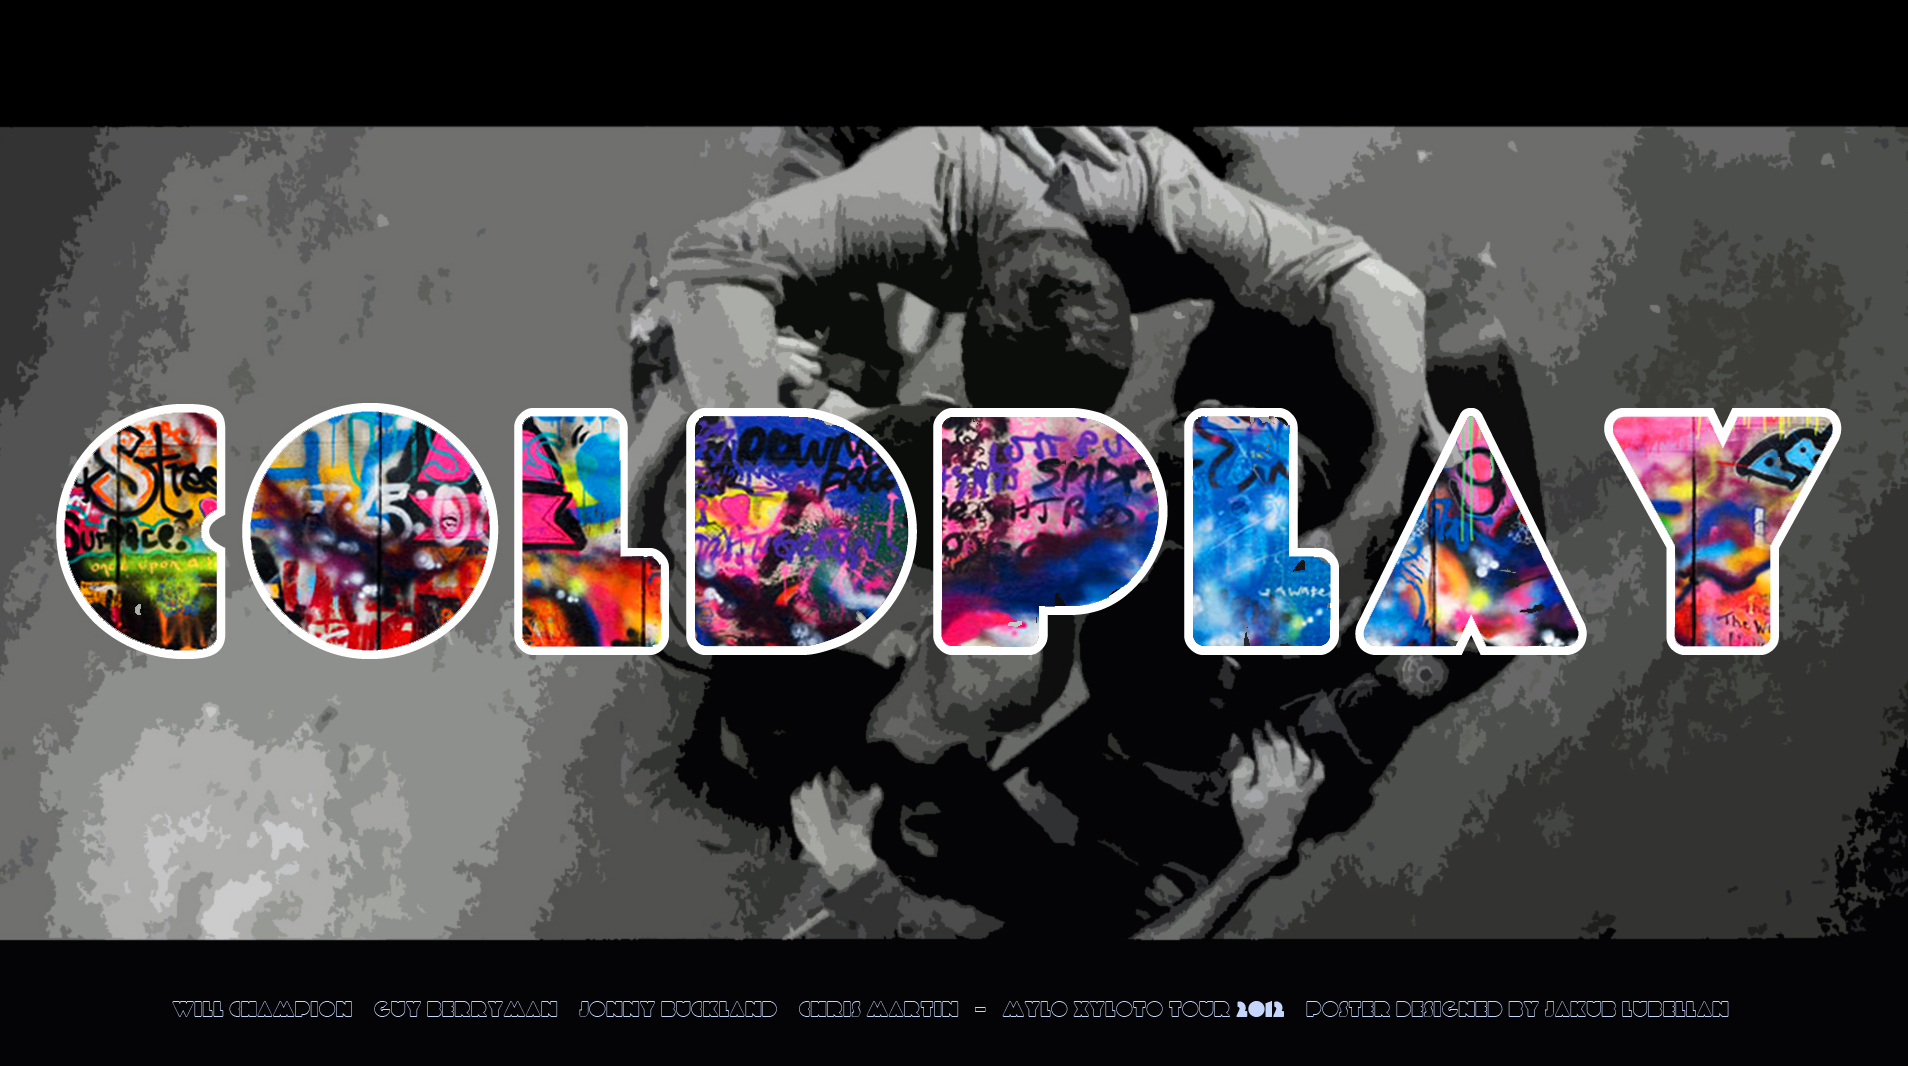 coldplay, music